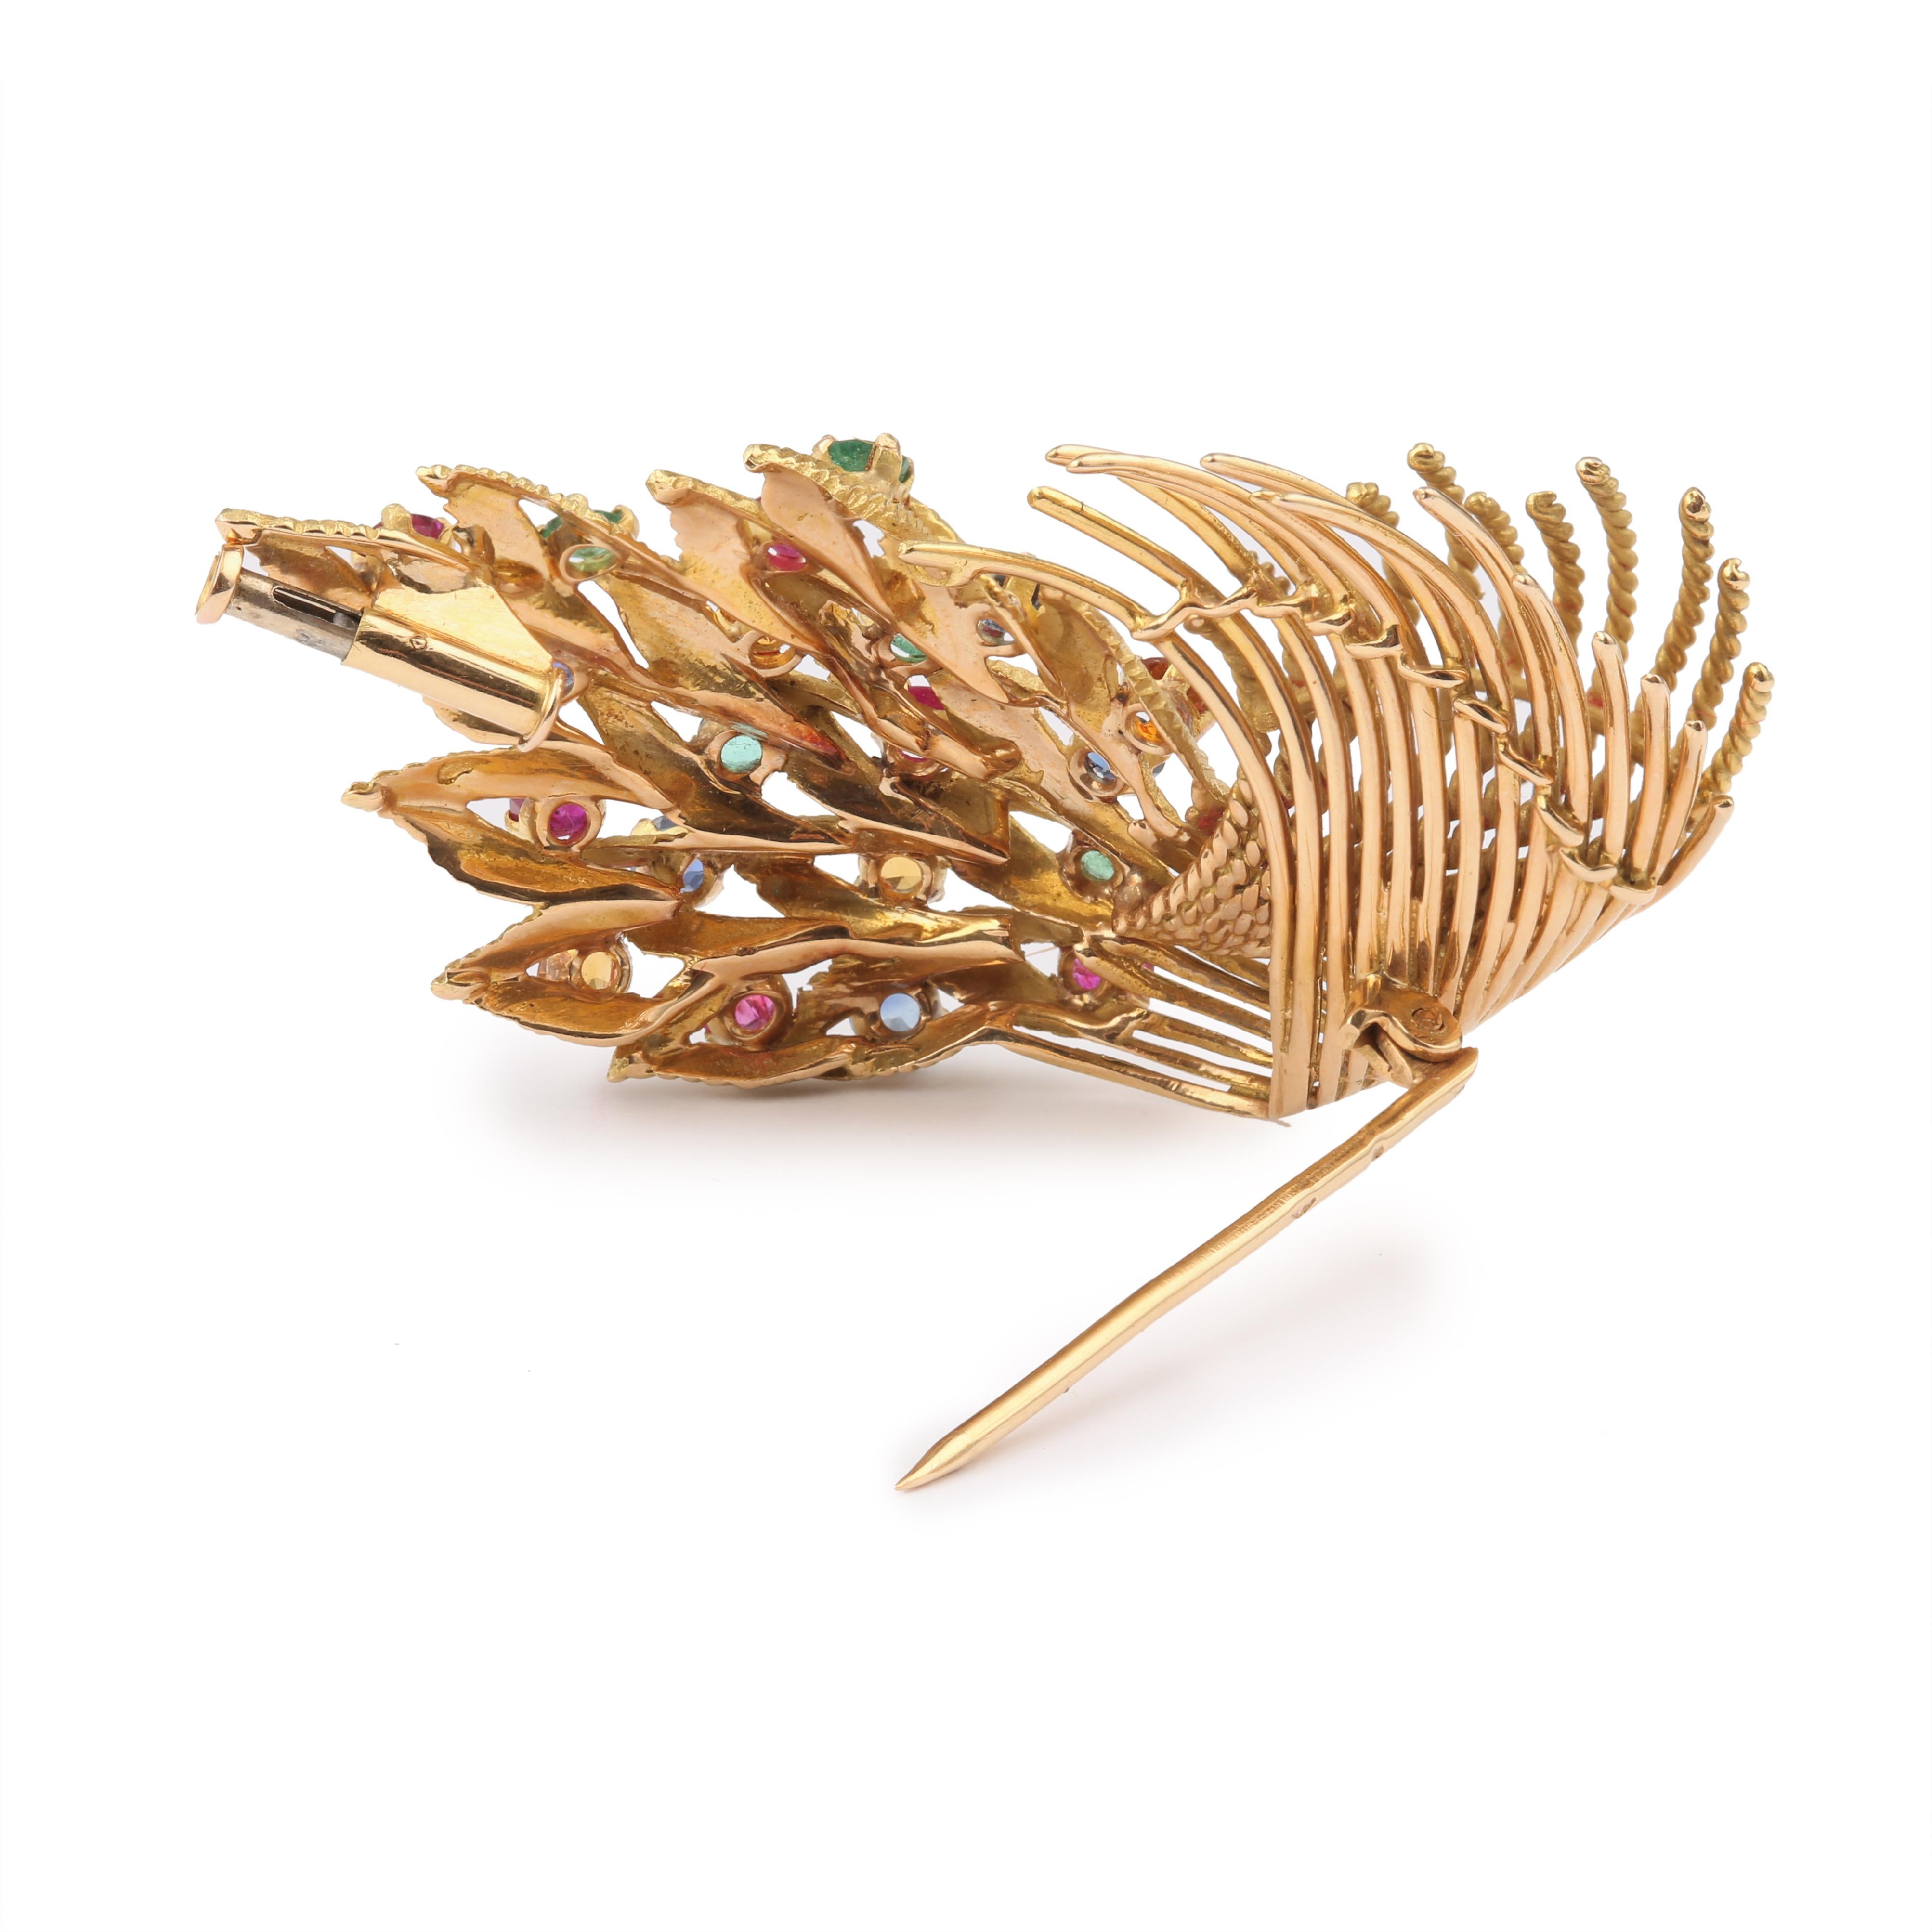 Retro brooch featuring a leaf in yellow gold and set with sapphires, rubies, emeralds and citrines.

Total estimated weight of sapphires : 0.60 carat

Total estimated weight of rubies : 0.60 carat

Total estimated weight of emeralds : 0.40